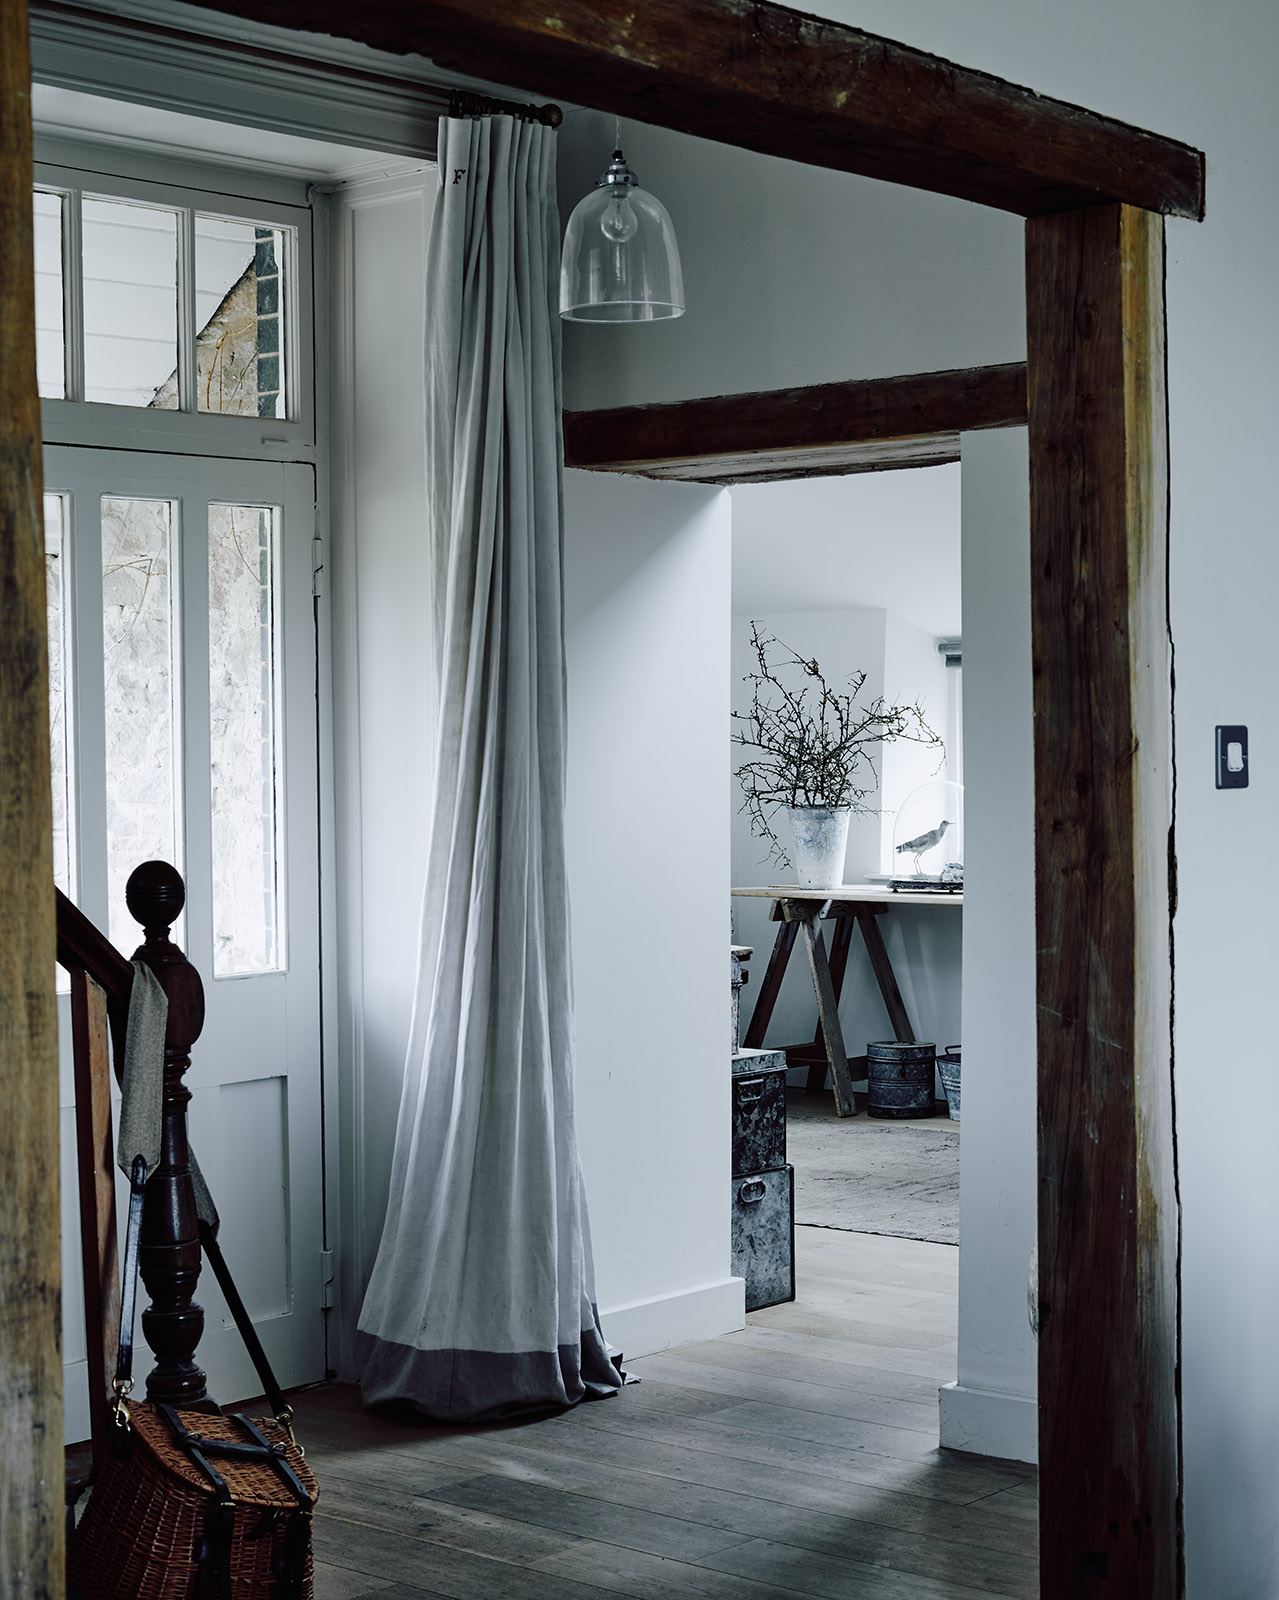 Wooden beams, shabby grey floors, baskets and those ethereal textiles add charm to the decor